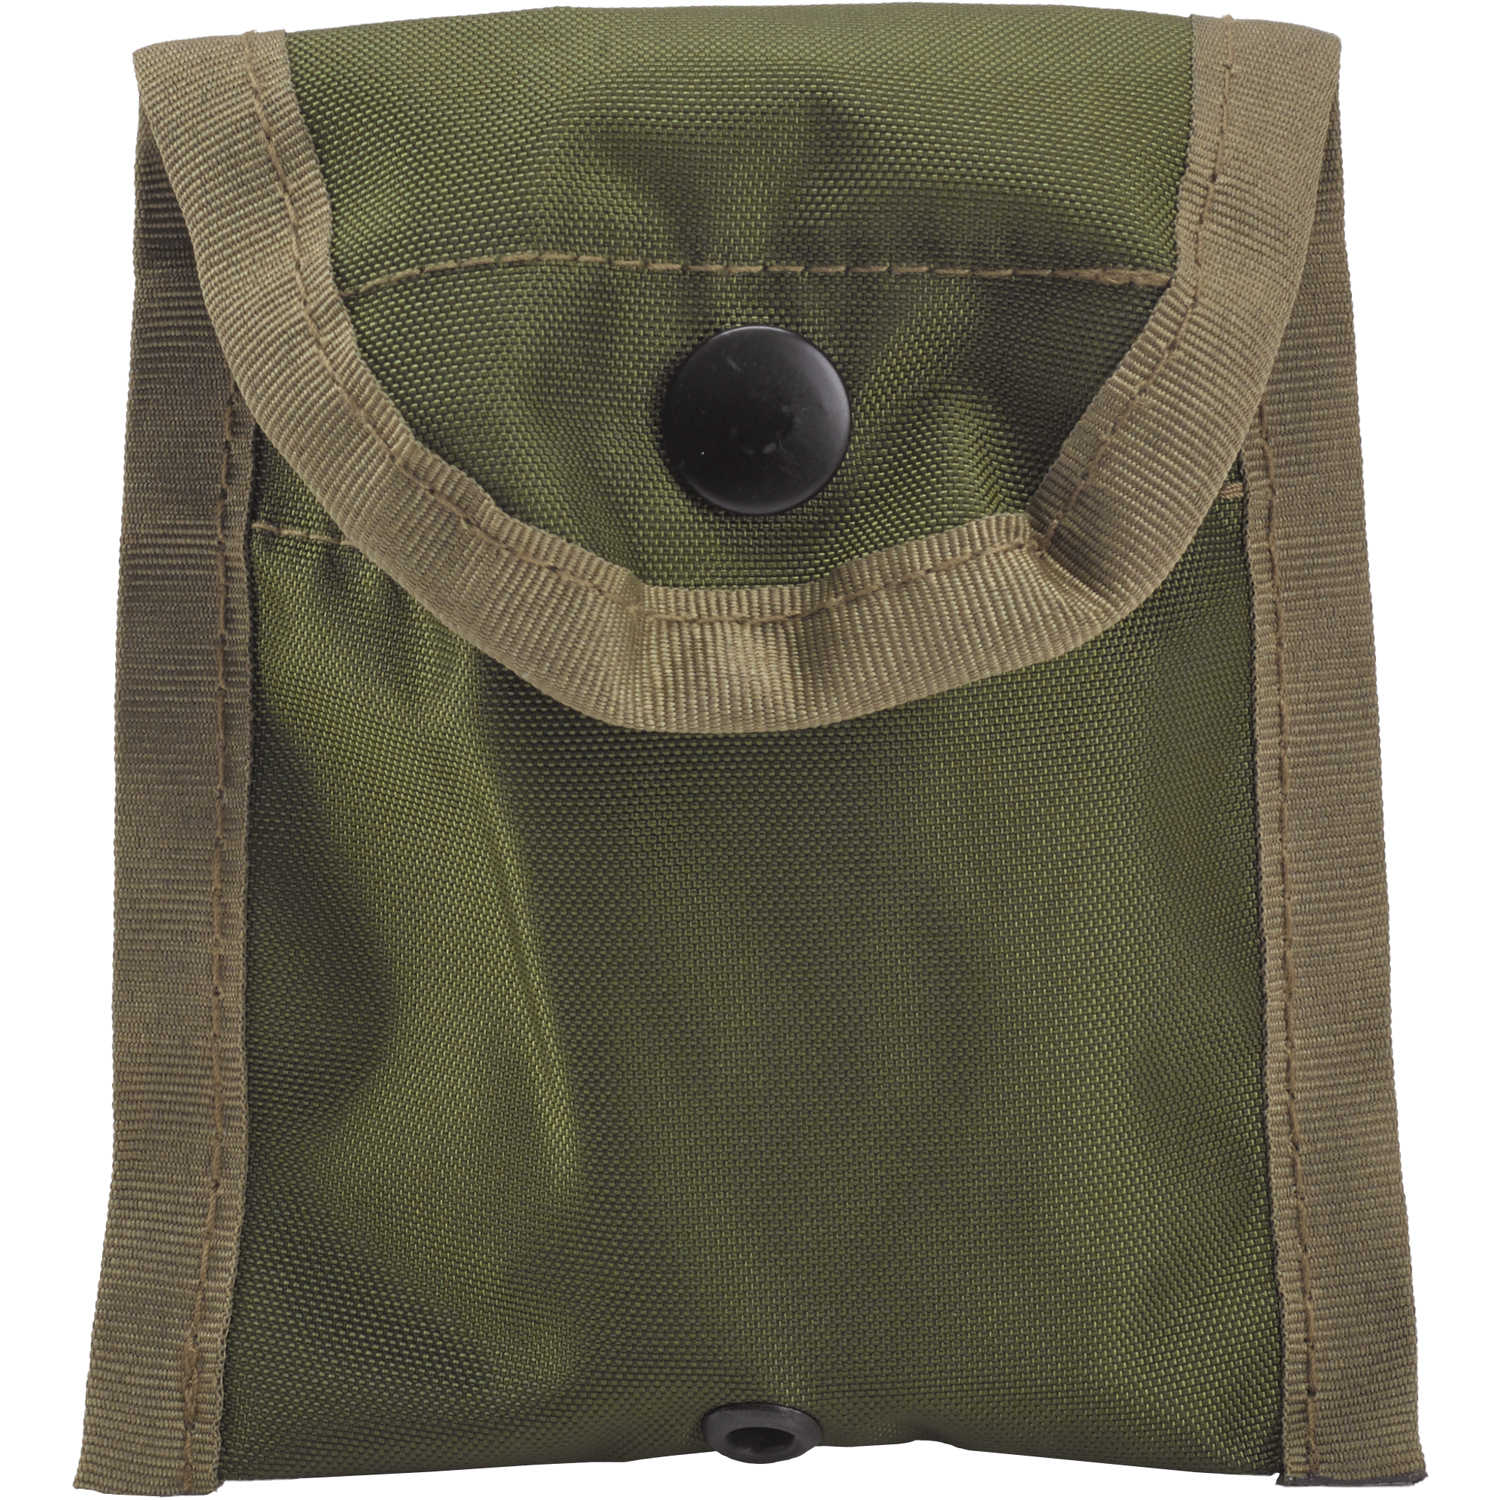 OD Green Military Nylon Compass Utility Bandage Pouch & Belt Clip Rothco 408 